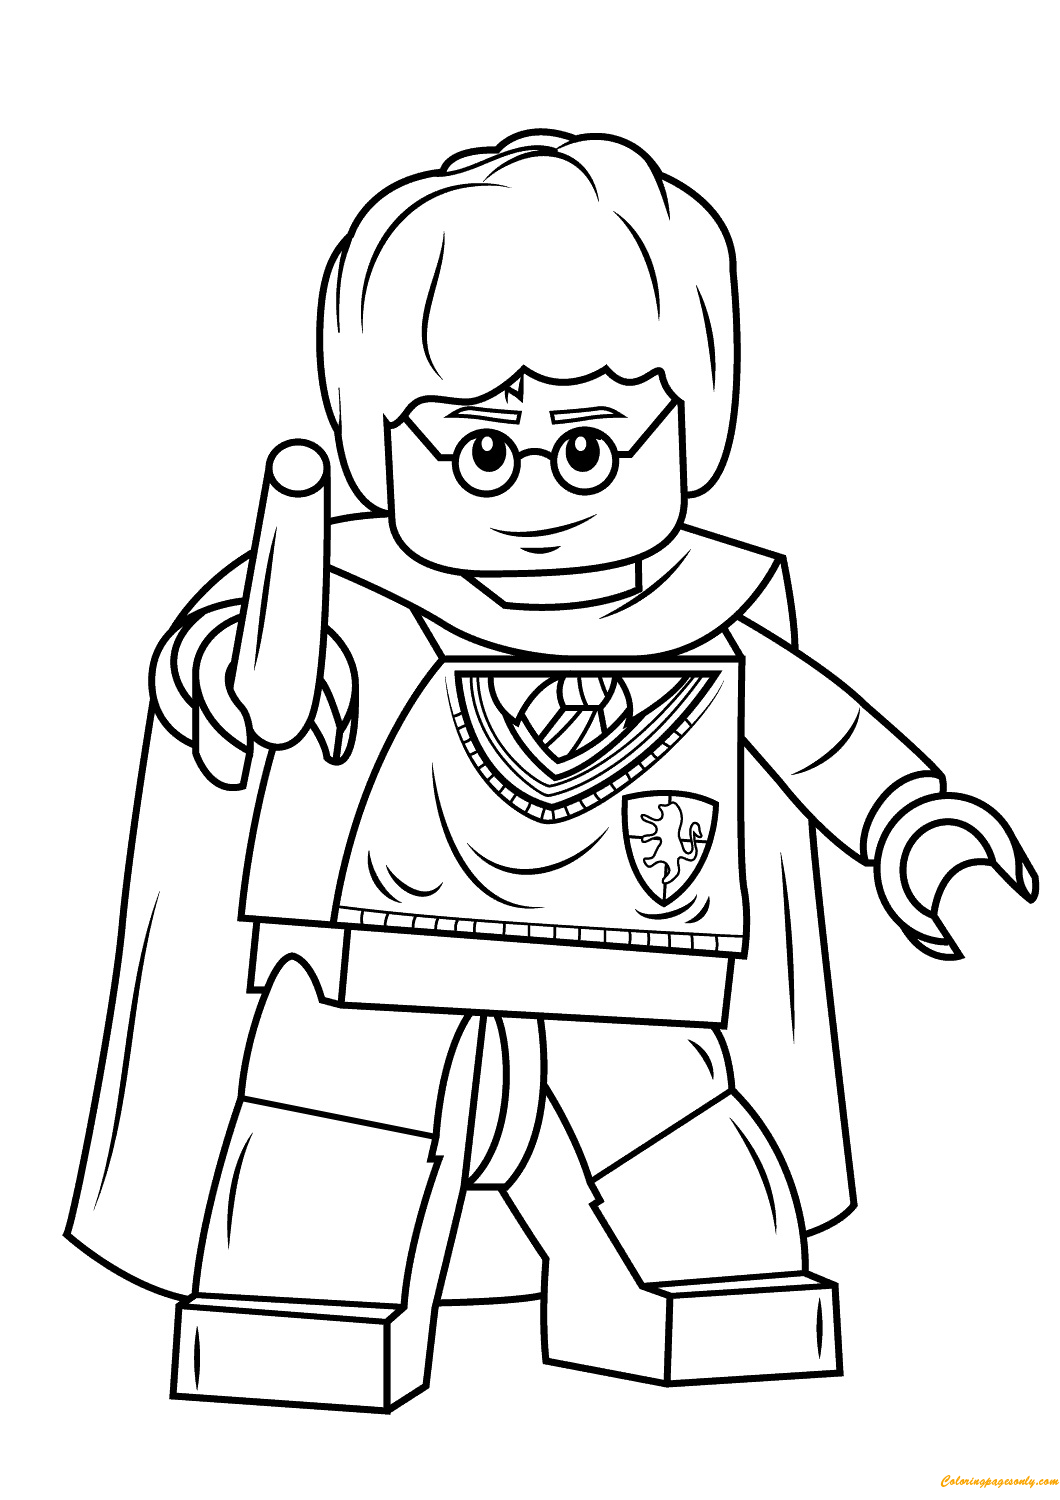 Lego Harry Potter Wands Coloring Page - Free Coloring Pages Online